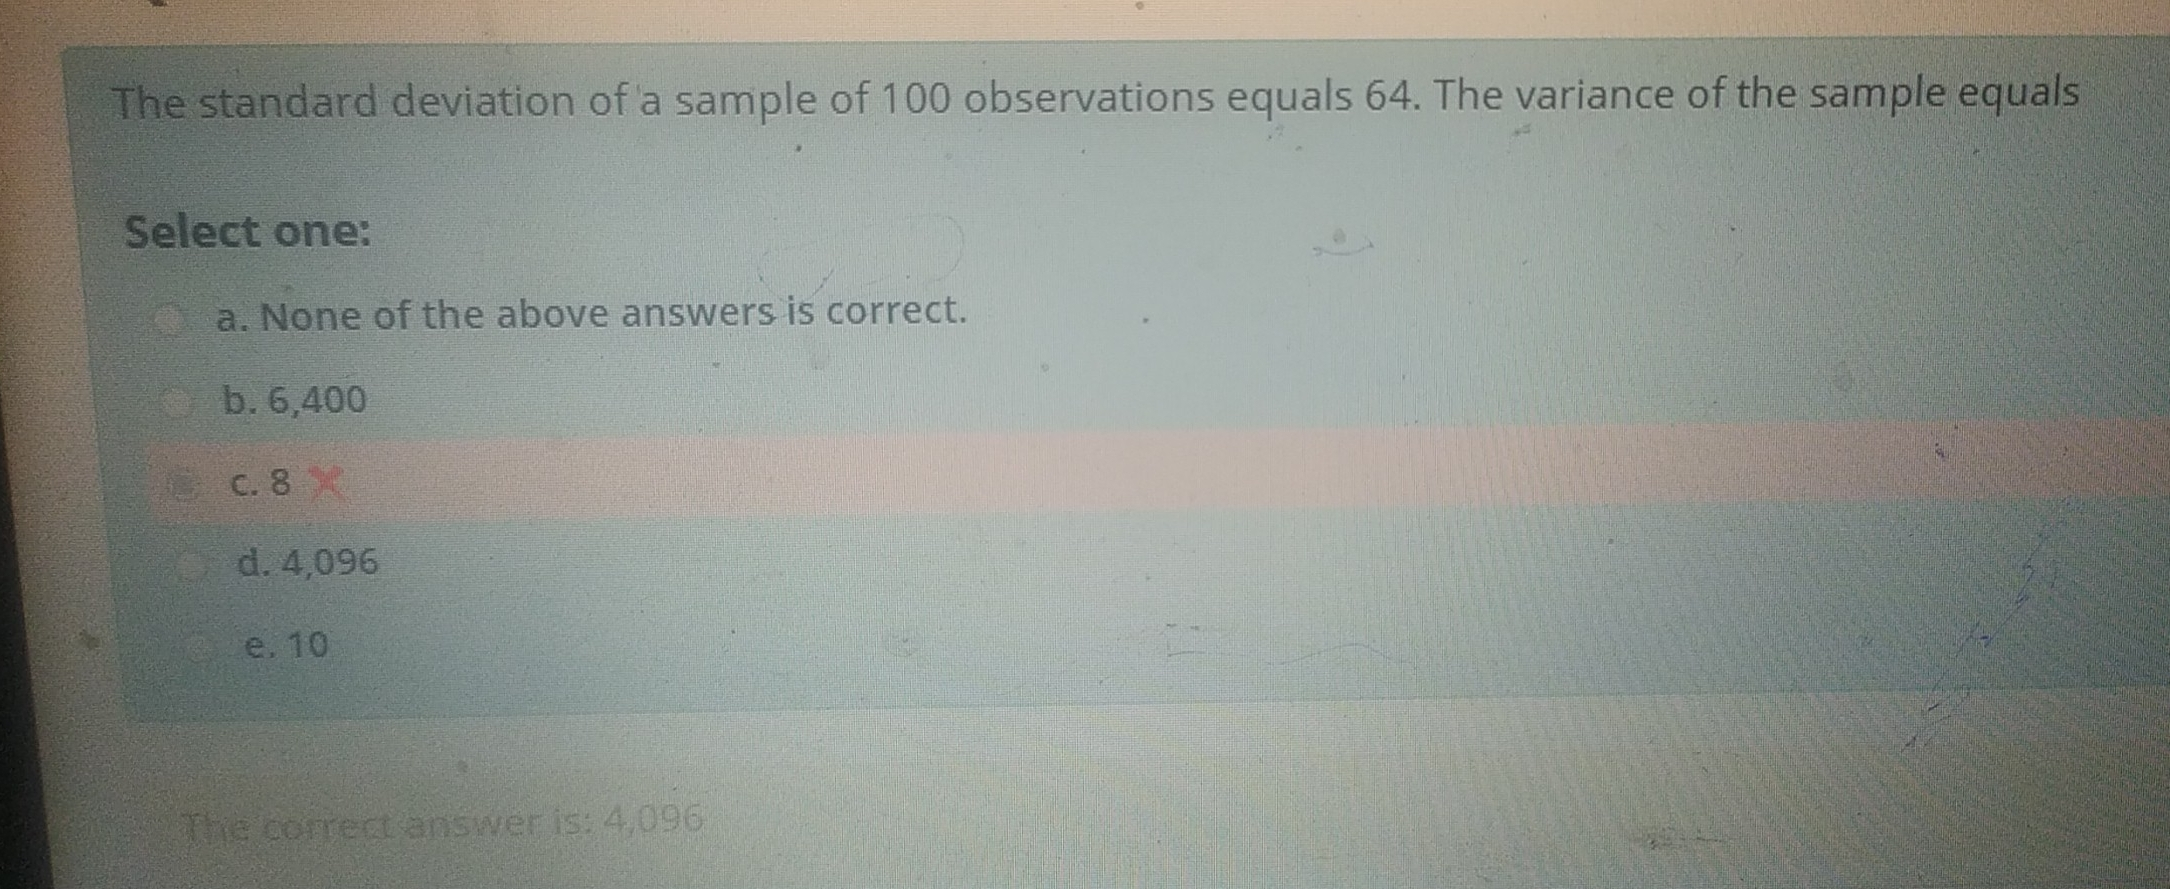 The standard deviation of a sample of 100 observations equals 64. The variance of the sample equals Select one: a. None of the above answers is correct. b. 6,400 c. 8 d. 4,096 e.10 The correct answer is: 4,096